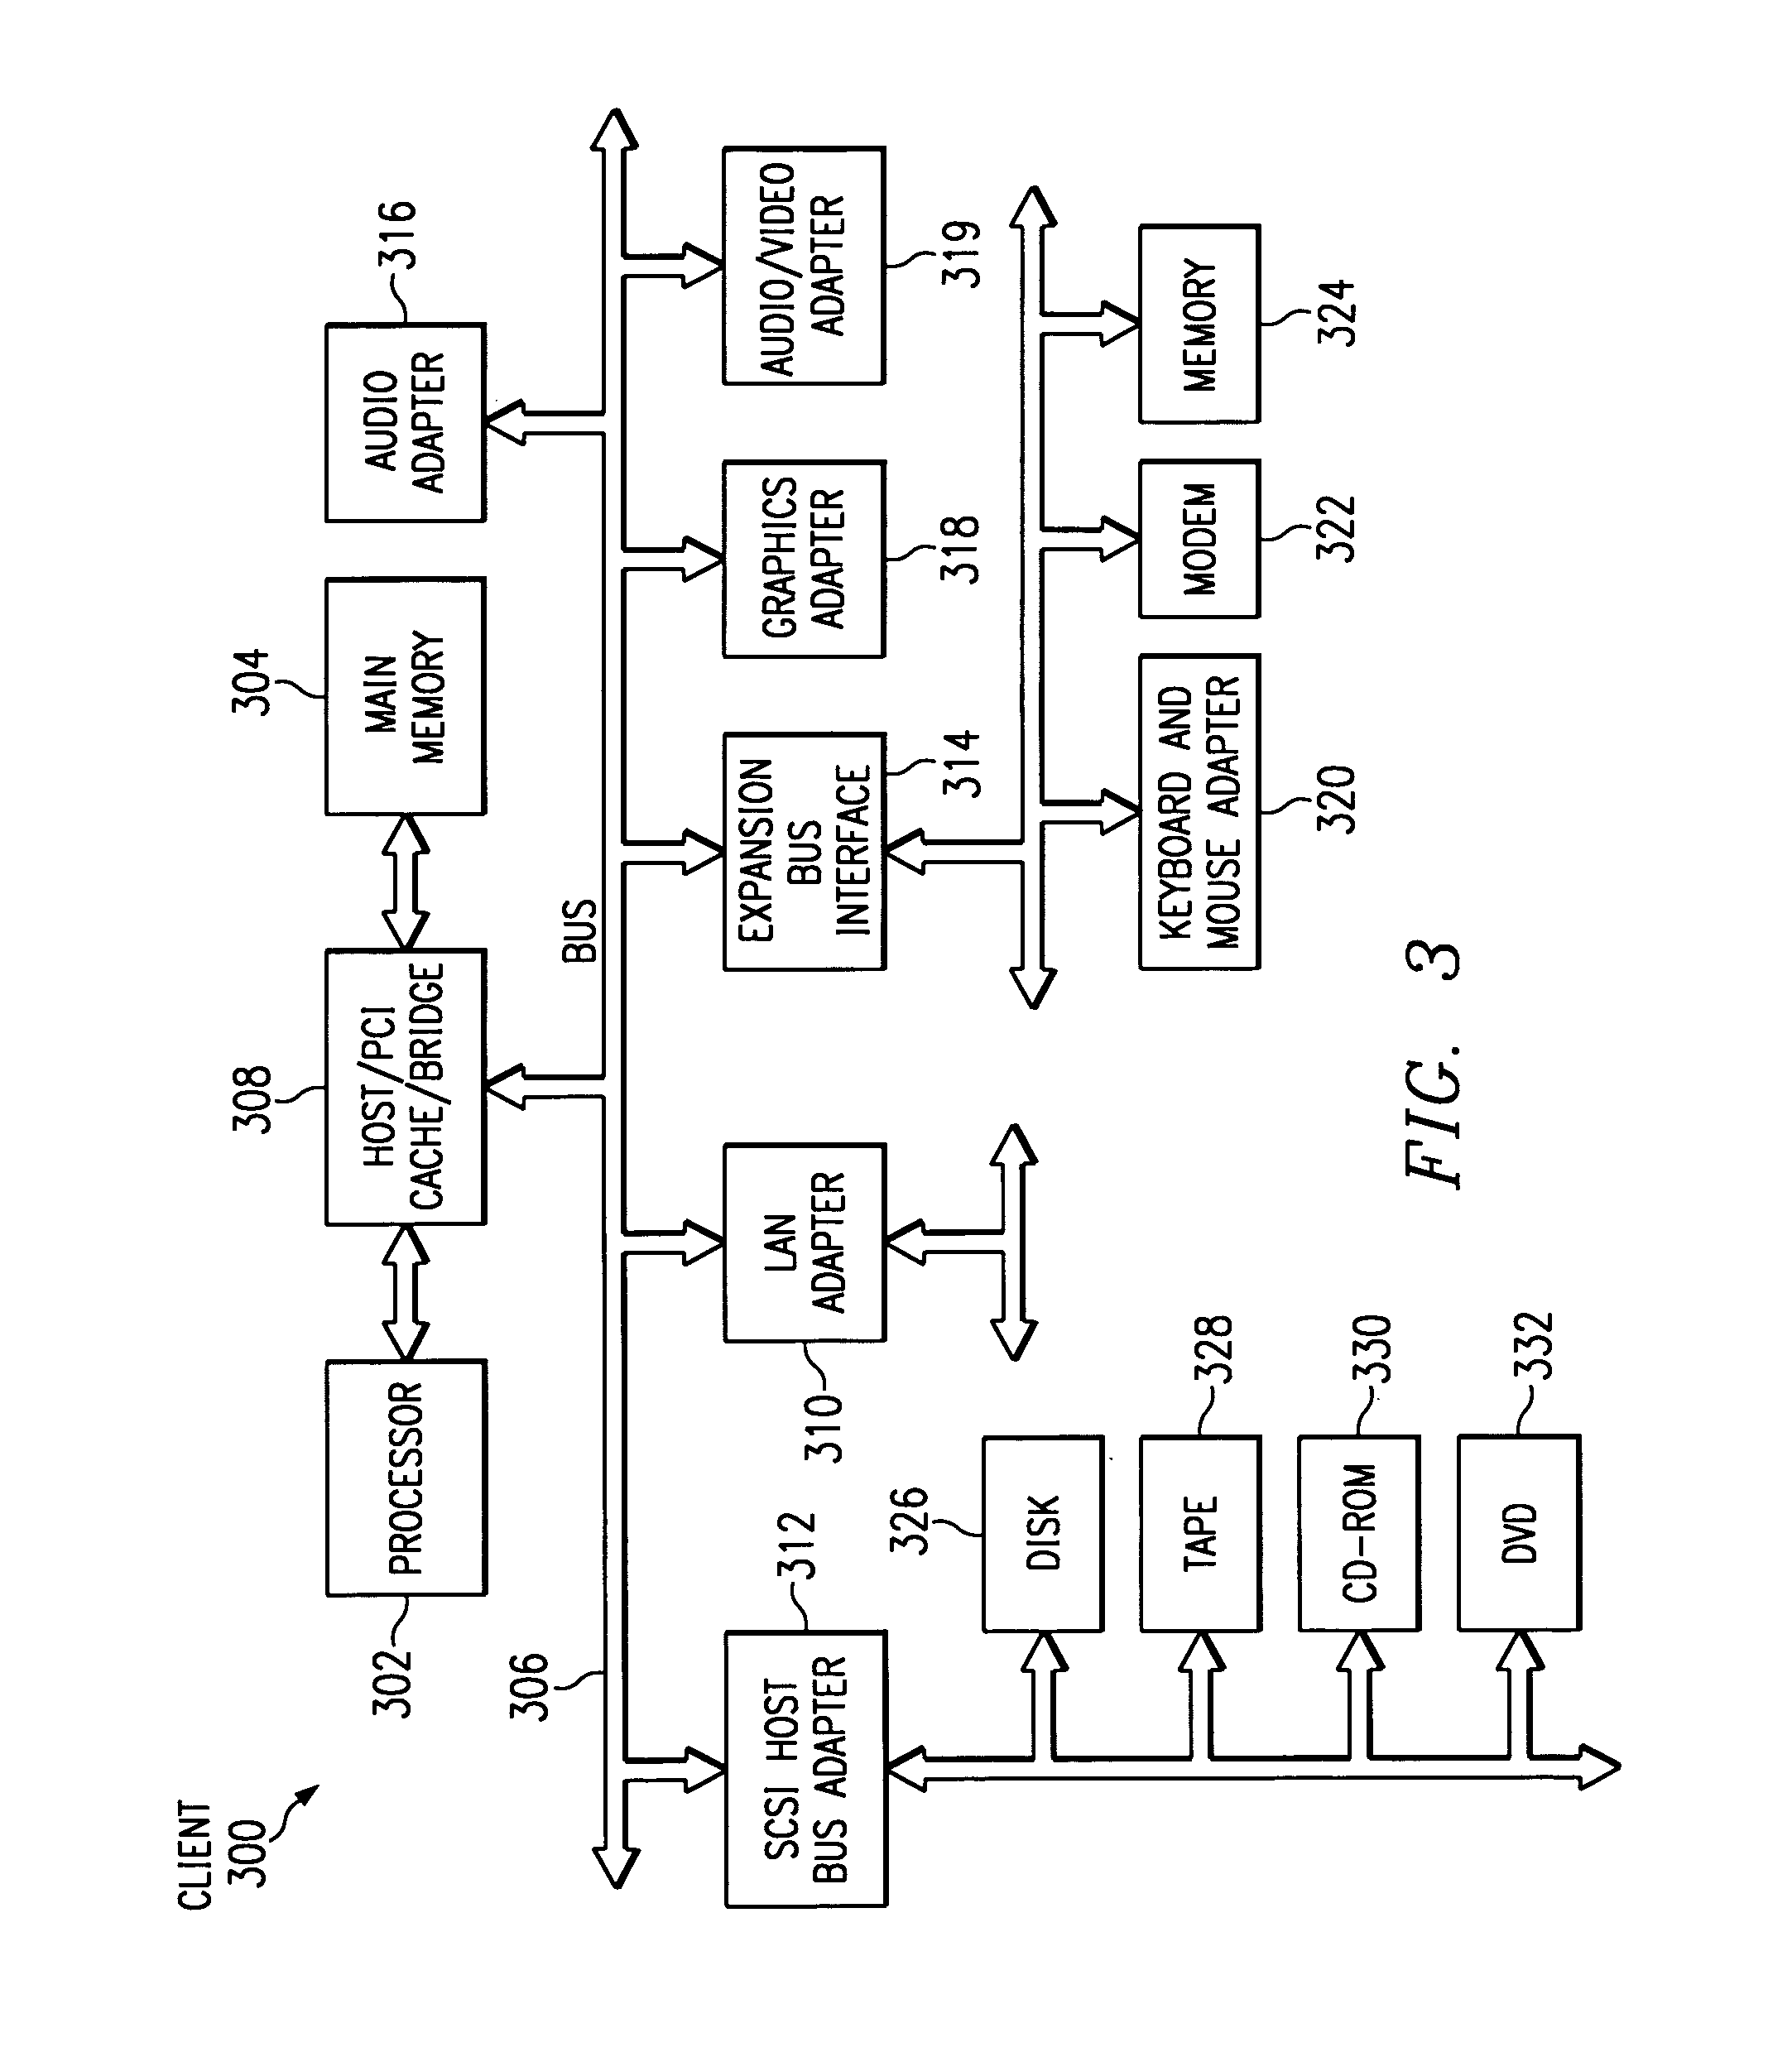 Method and apparatus for providing reduced cost online service and adaptive targeting of advertisements